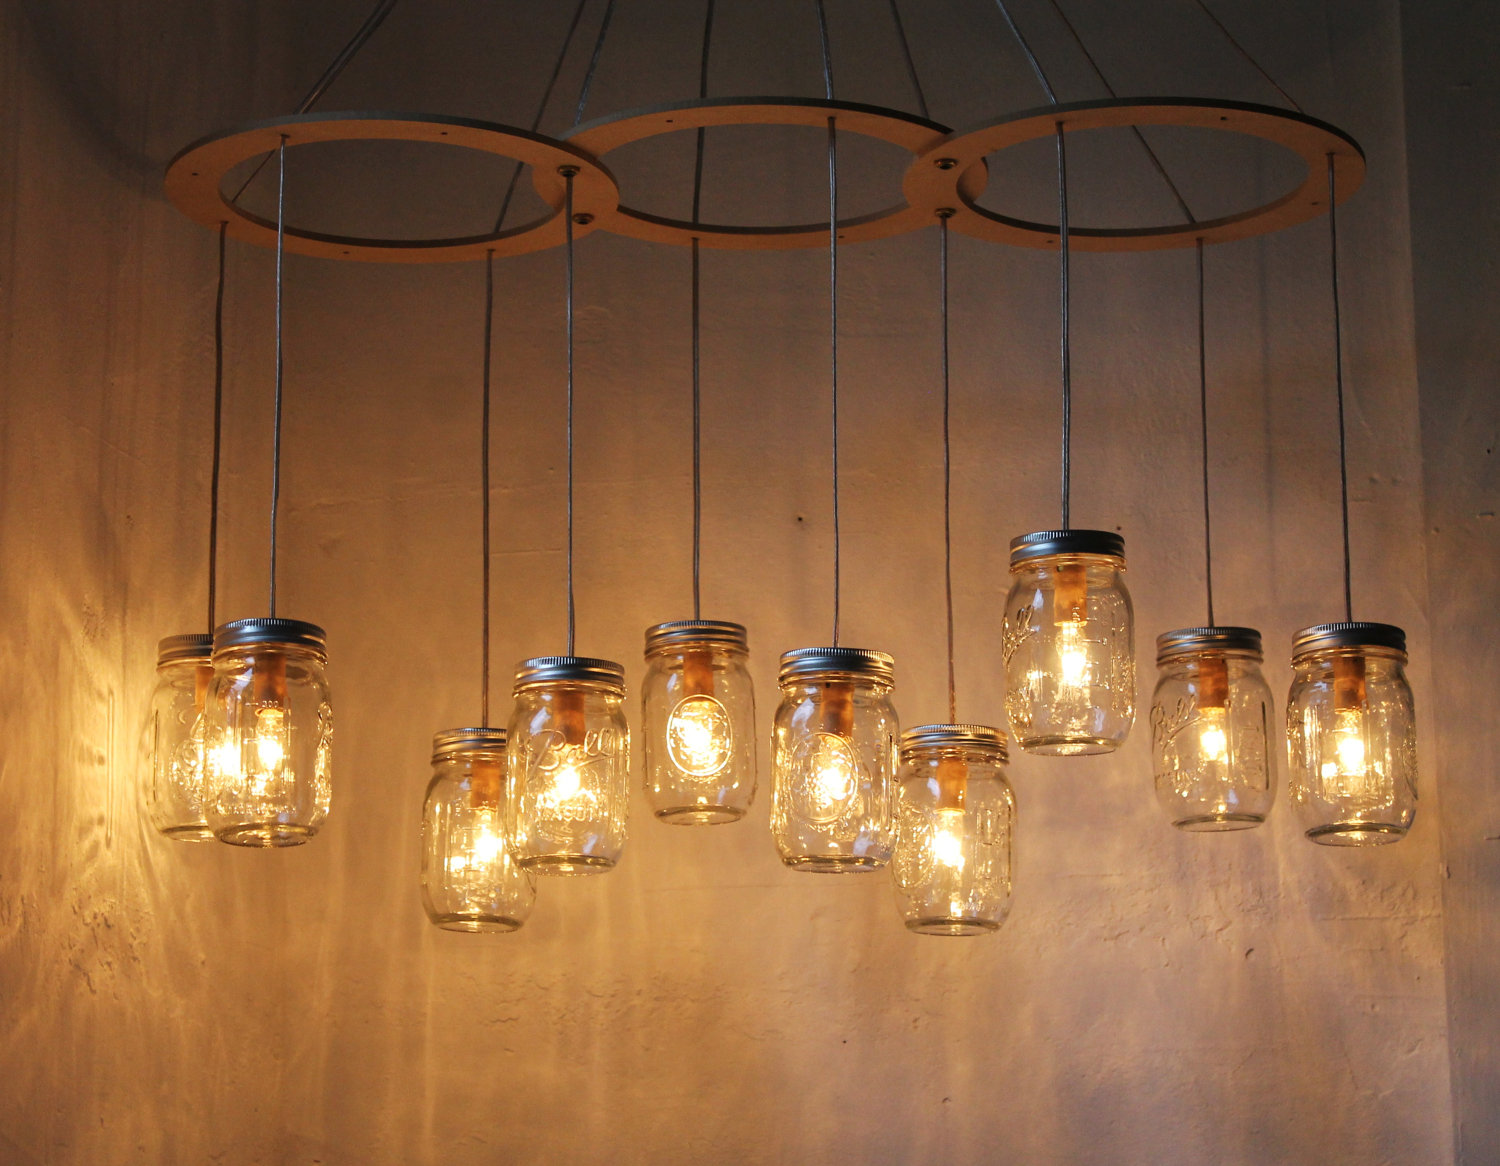 Diy Pendant Lights How To Build Your, Diy Hanging Lamps Images